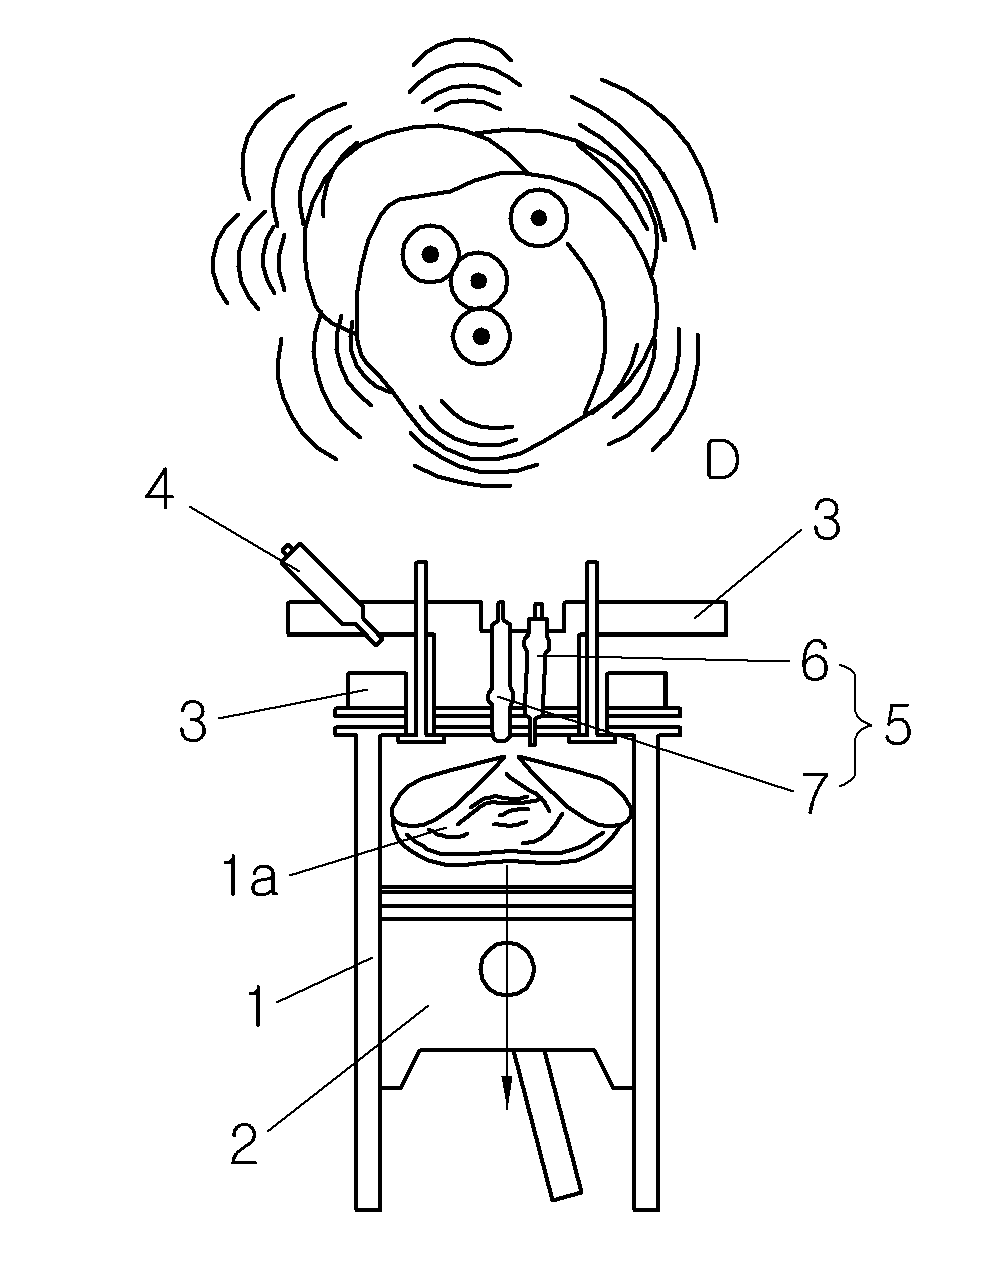 Dual fuel combustion system based on diesel compression ignition triggered ignition control